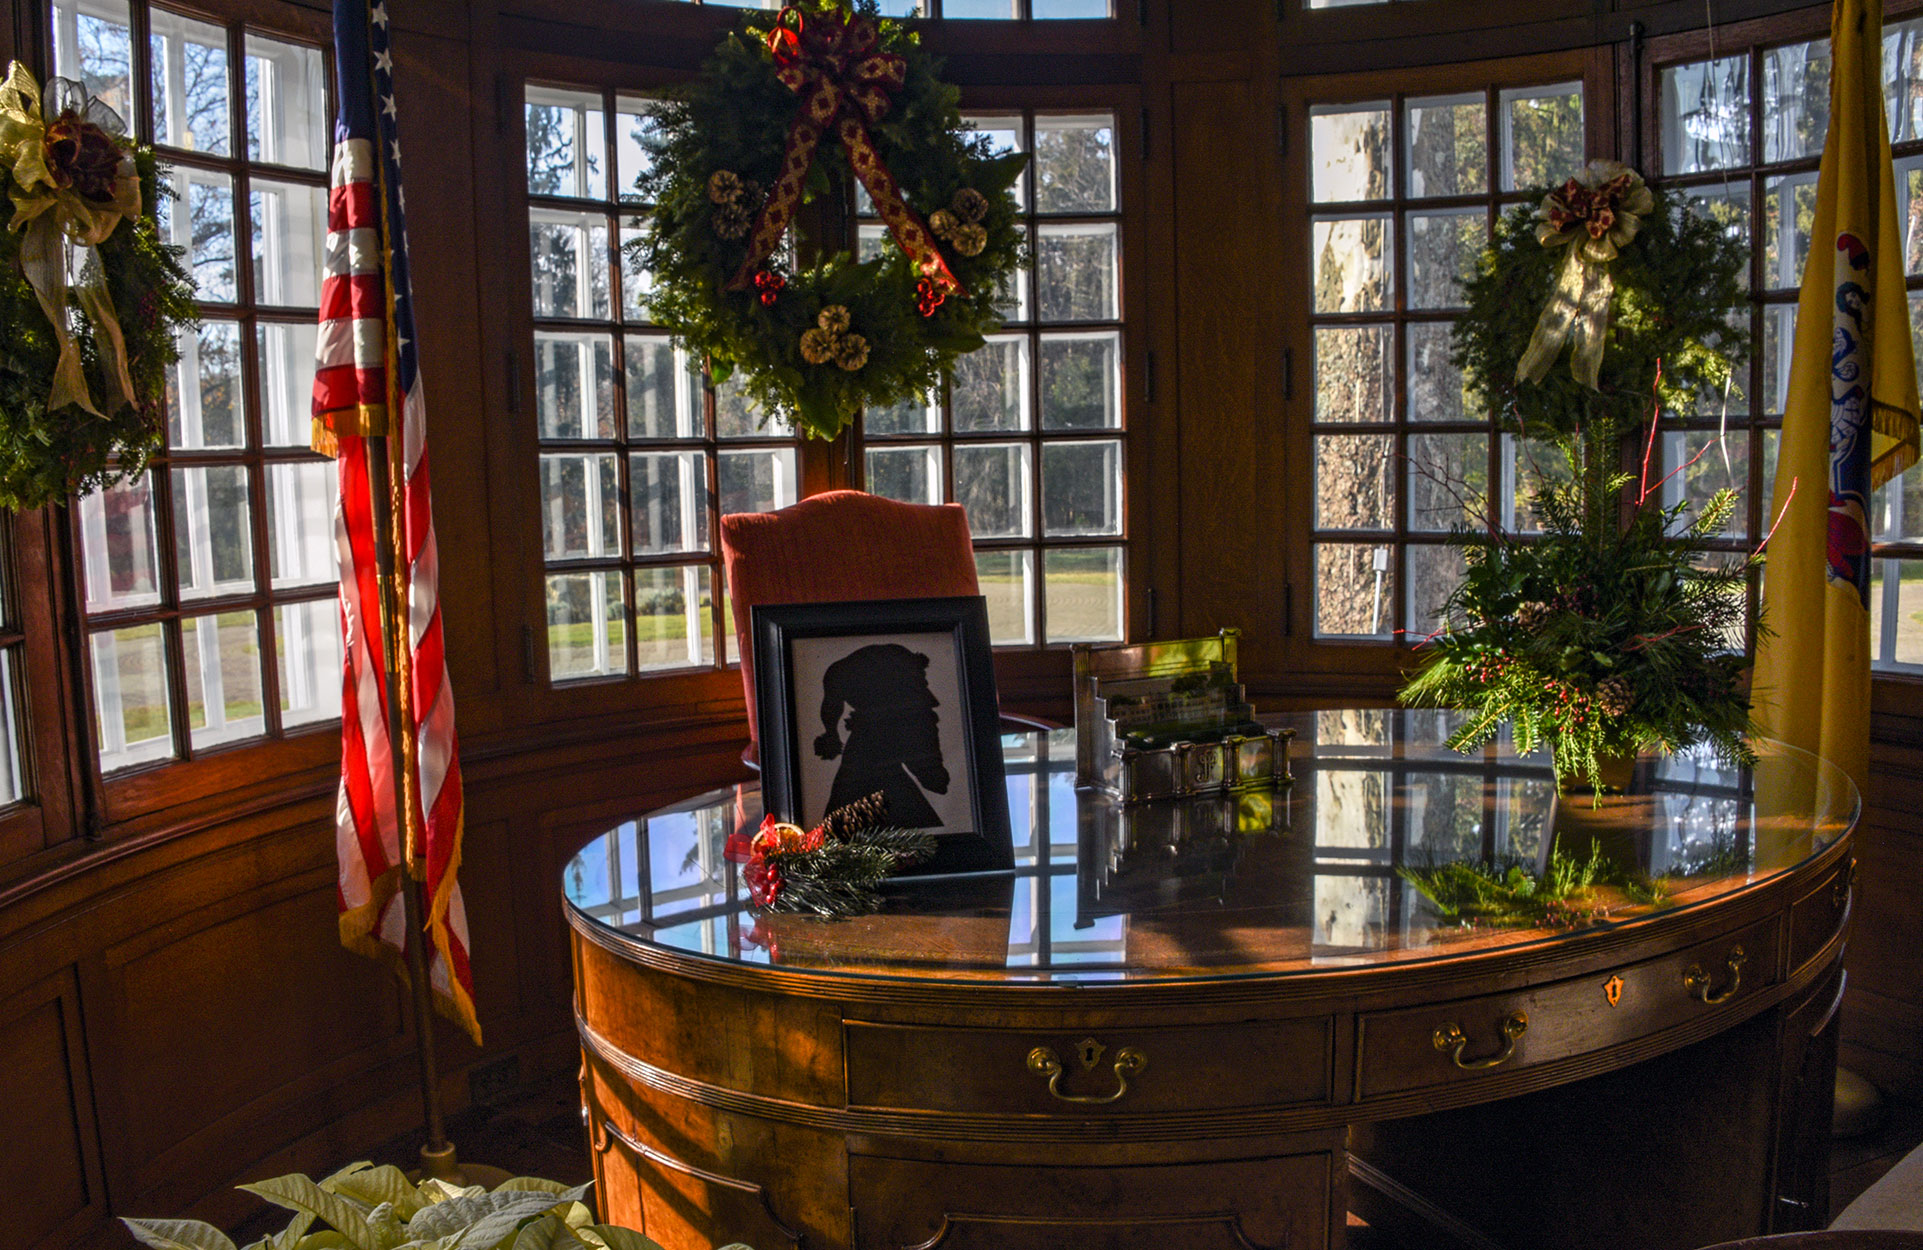 Bow windows in the Governors Study, decorated with festive wreaths and framed Santa profile on the desk.